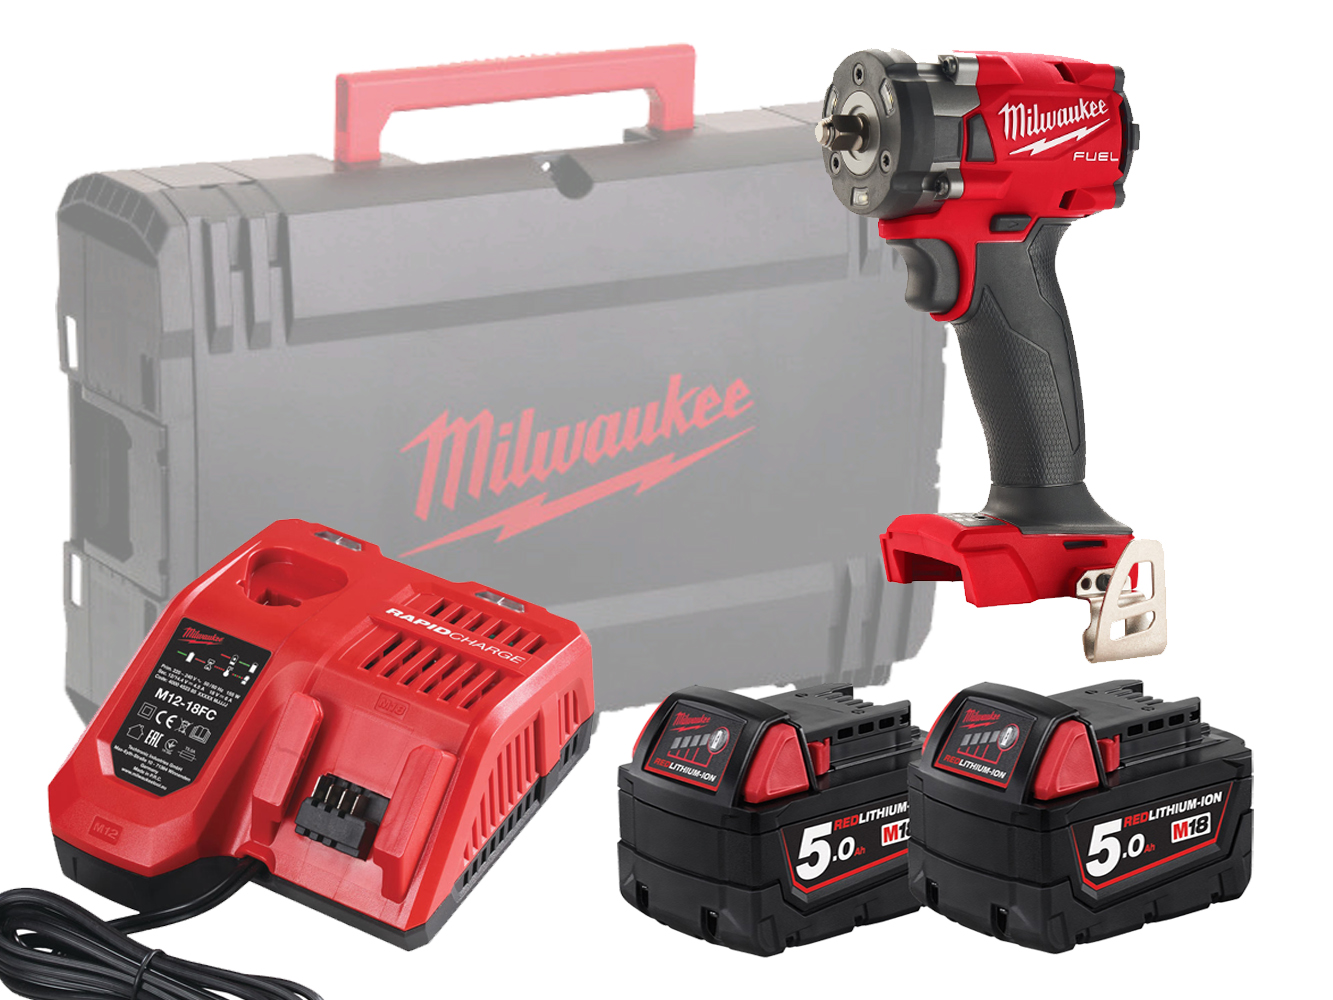 Milwaukee M18FIW2F38 18V Fuel Brushless 2nd Gen 3/8in Impact Wrench - 5.0AH Pack